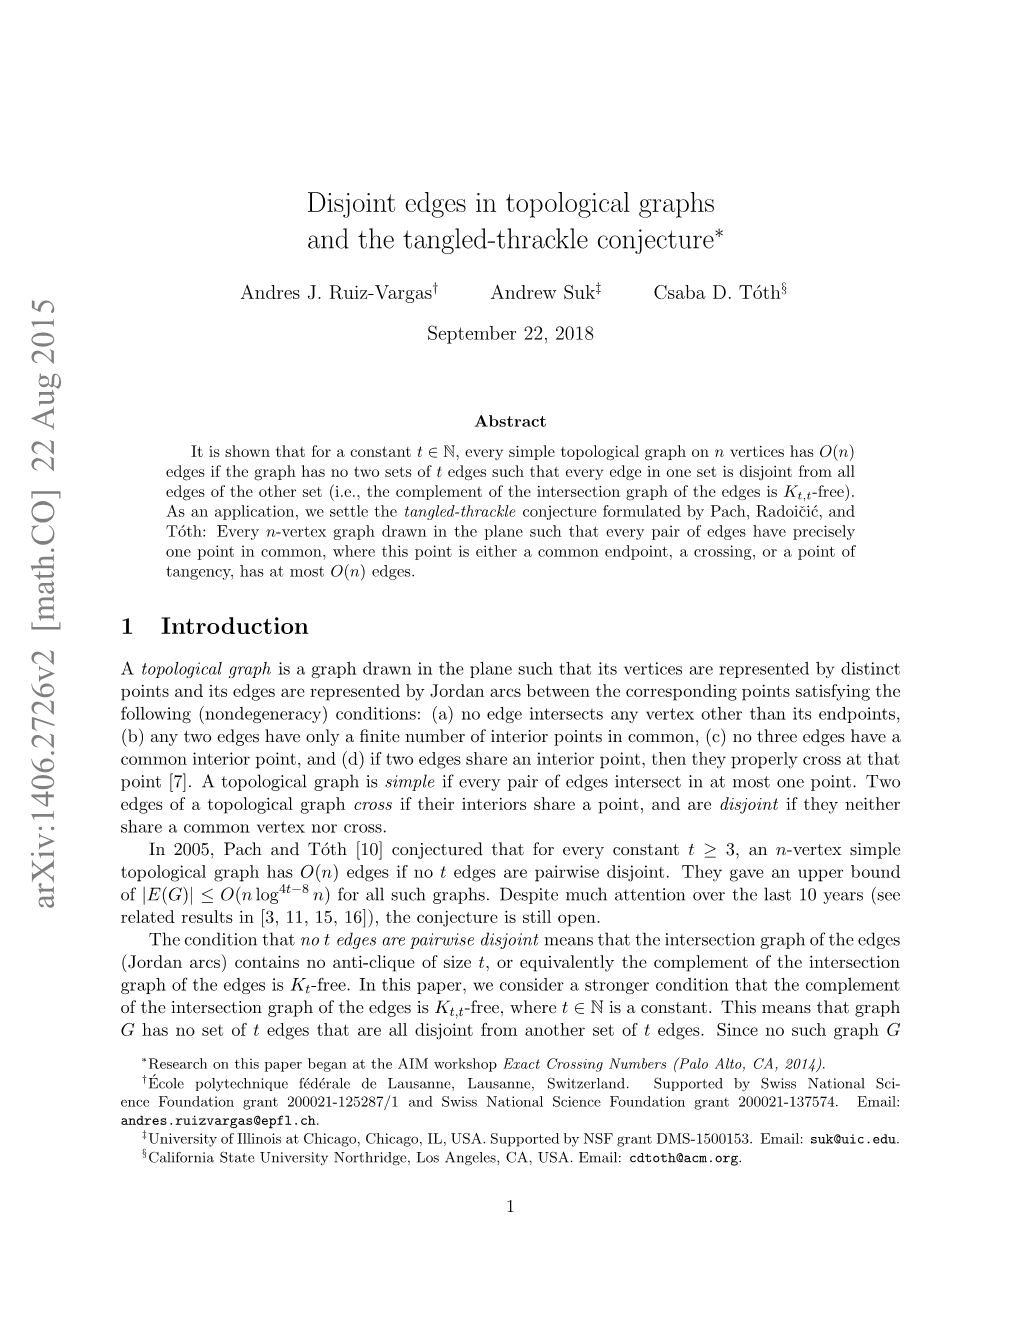 Disjoint Edges in Topological Graphs and the Tangled-Thrackle Conjecture